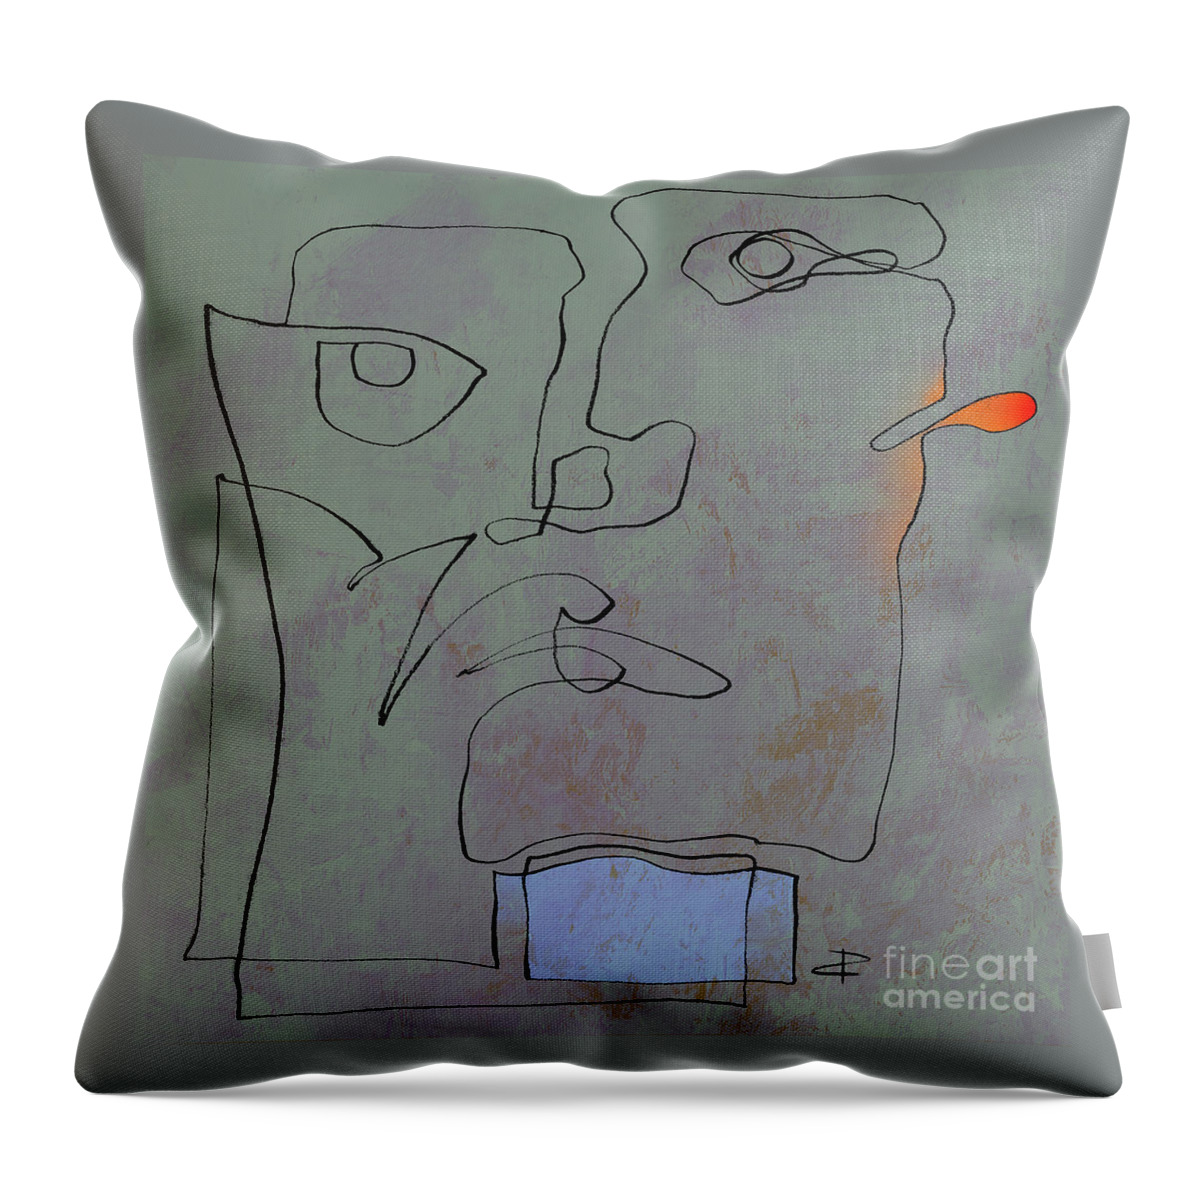 Red Ear Throw Pillow featuring the painting Squigglehead with blue scarf and red ear by Paul Davenport